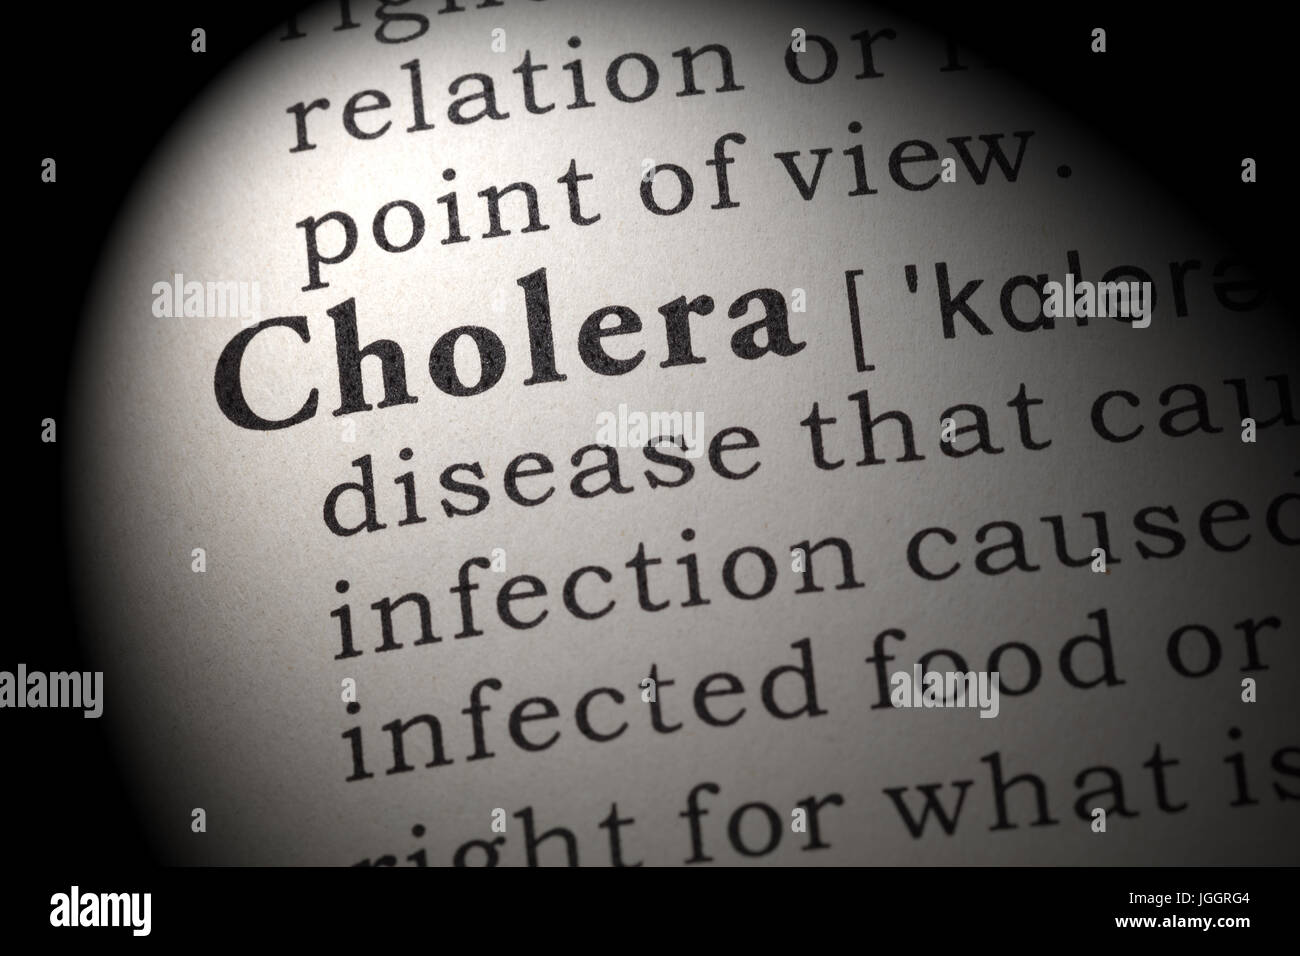 Fake Dictionary, Dictionary definition of the word cholera. including key descriptive words. Stock Photo